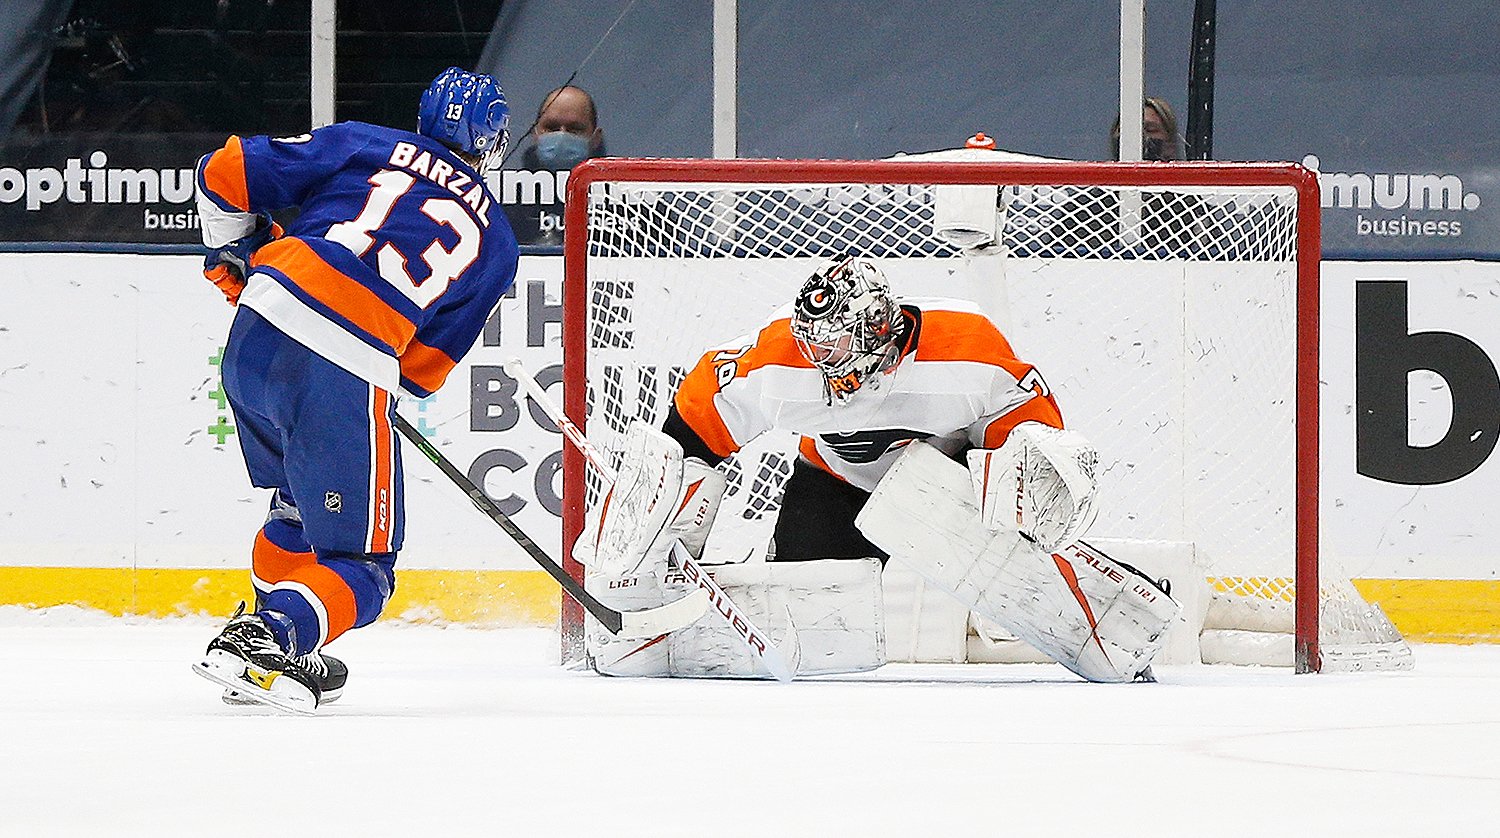 NHL negotiation deadline: with Flyers pondering moves, Carter Hart impresses, but the team falls into a firefight for the islanders